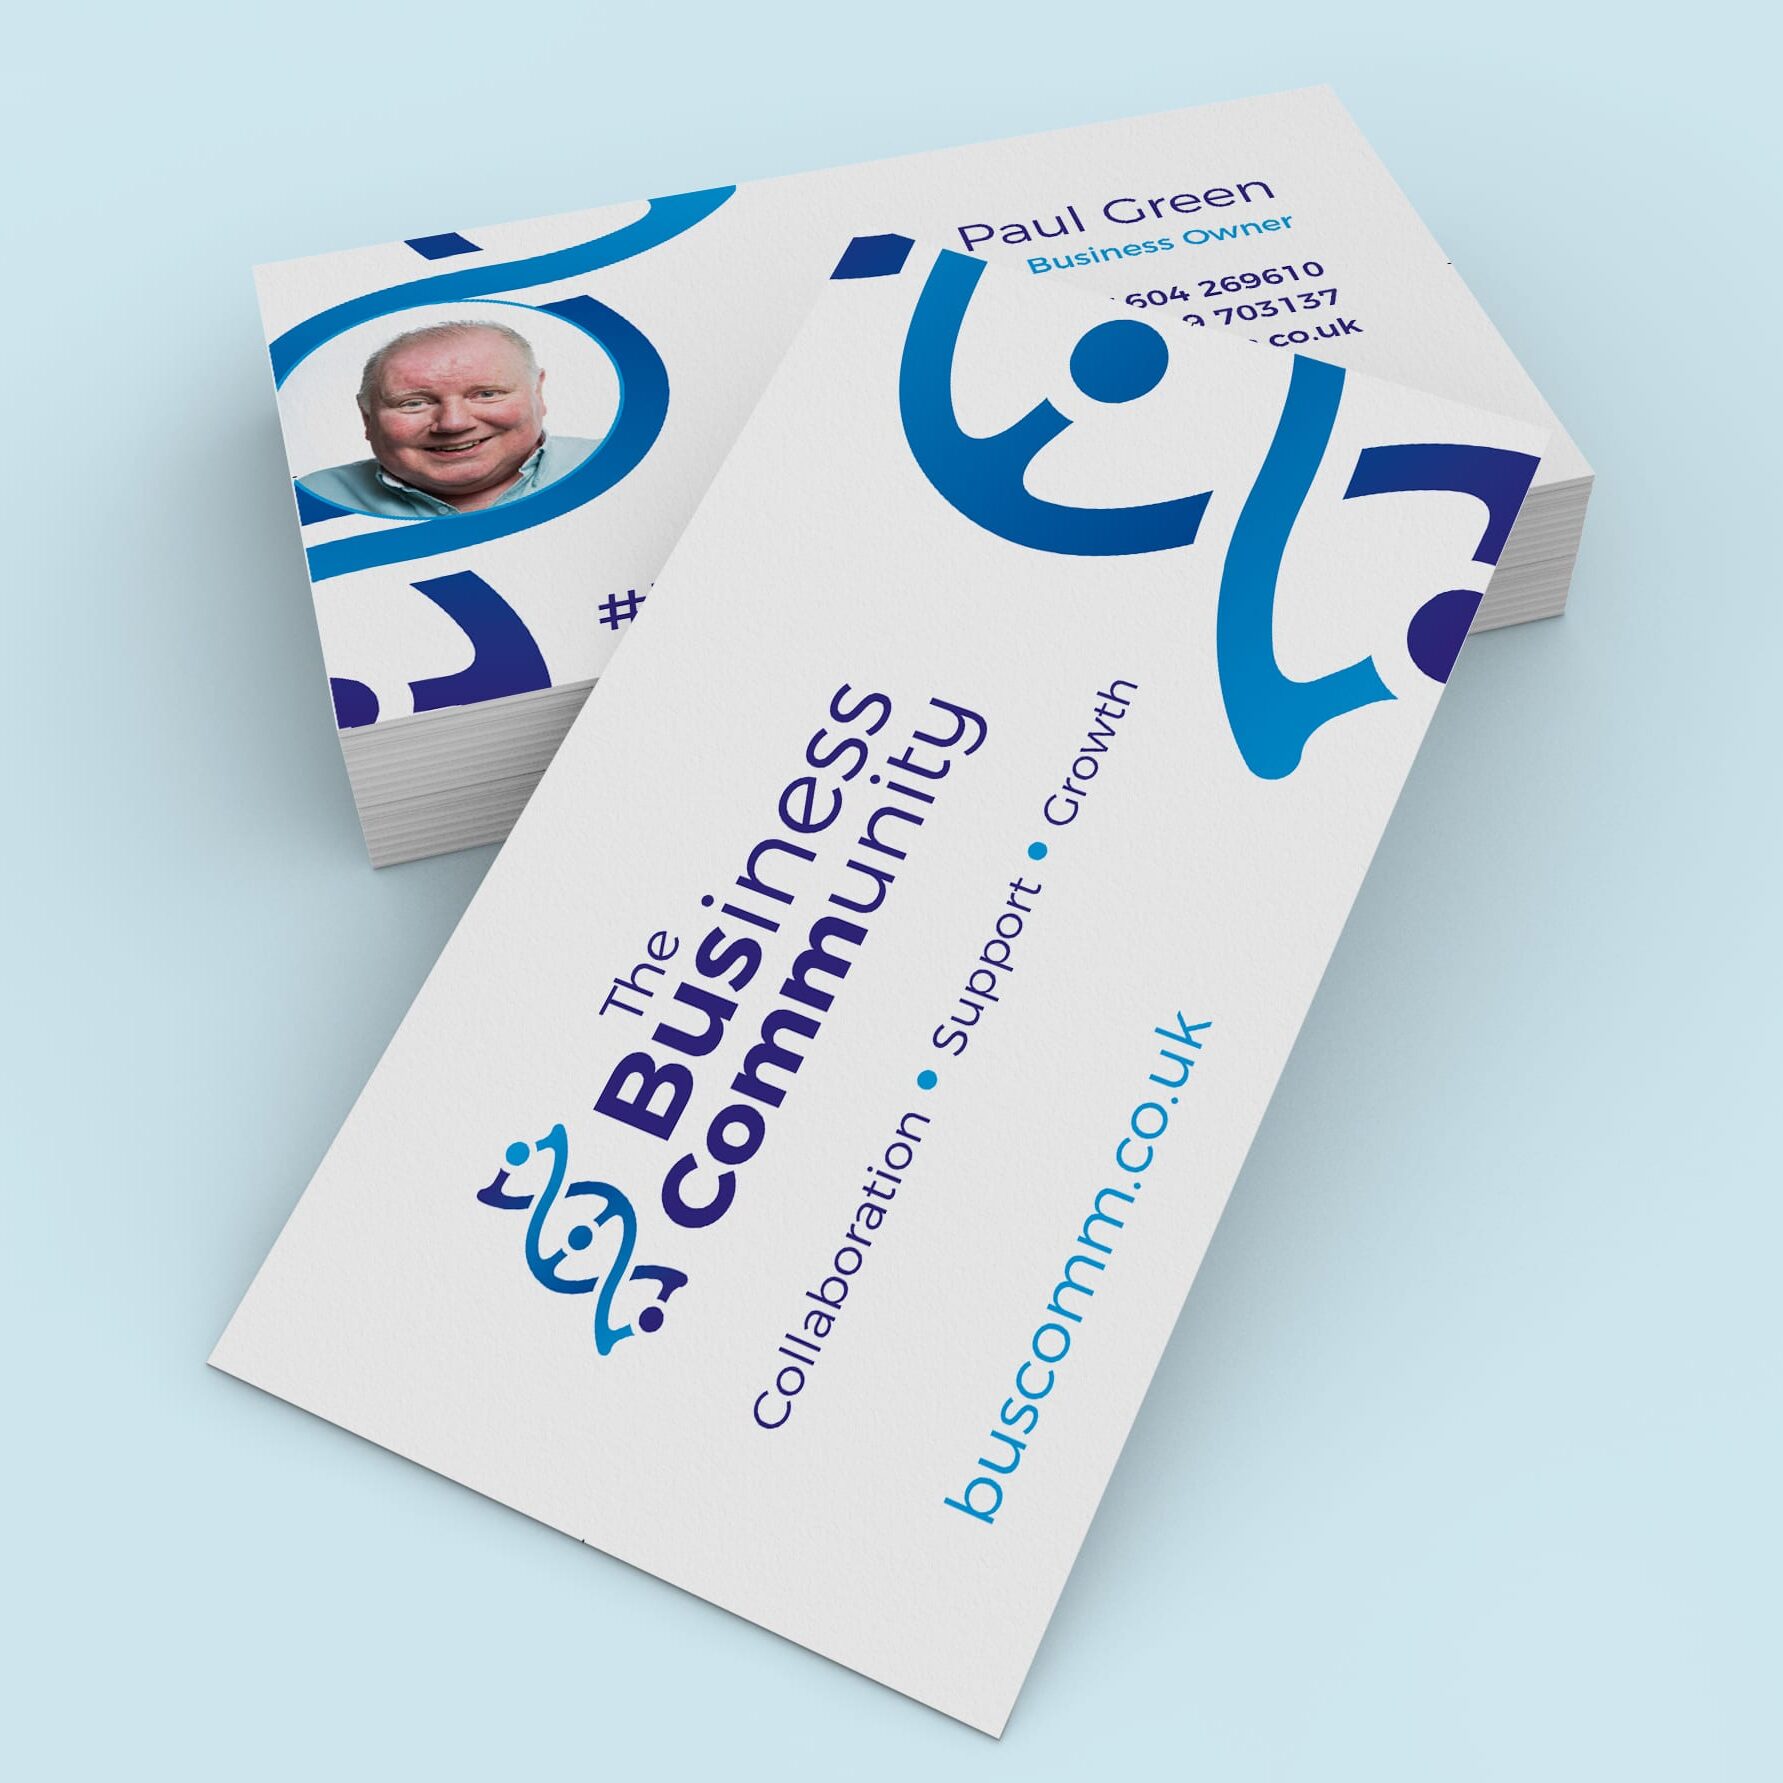 Business cards design for The Business Community